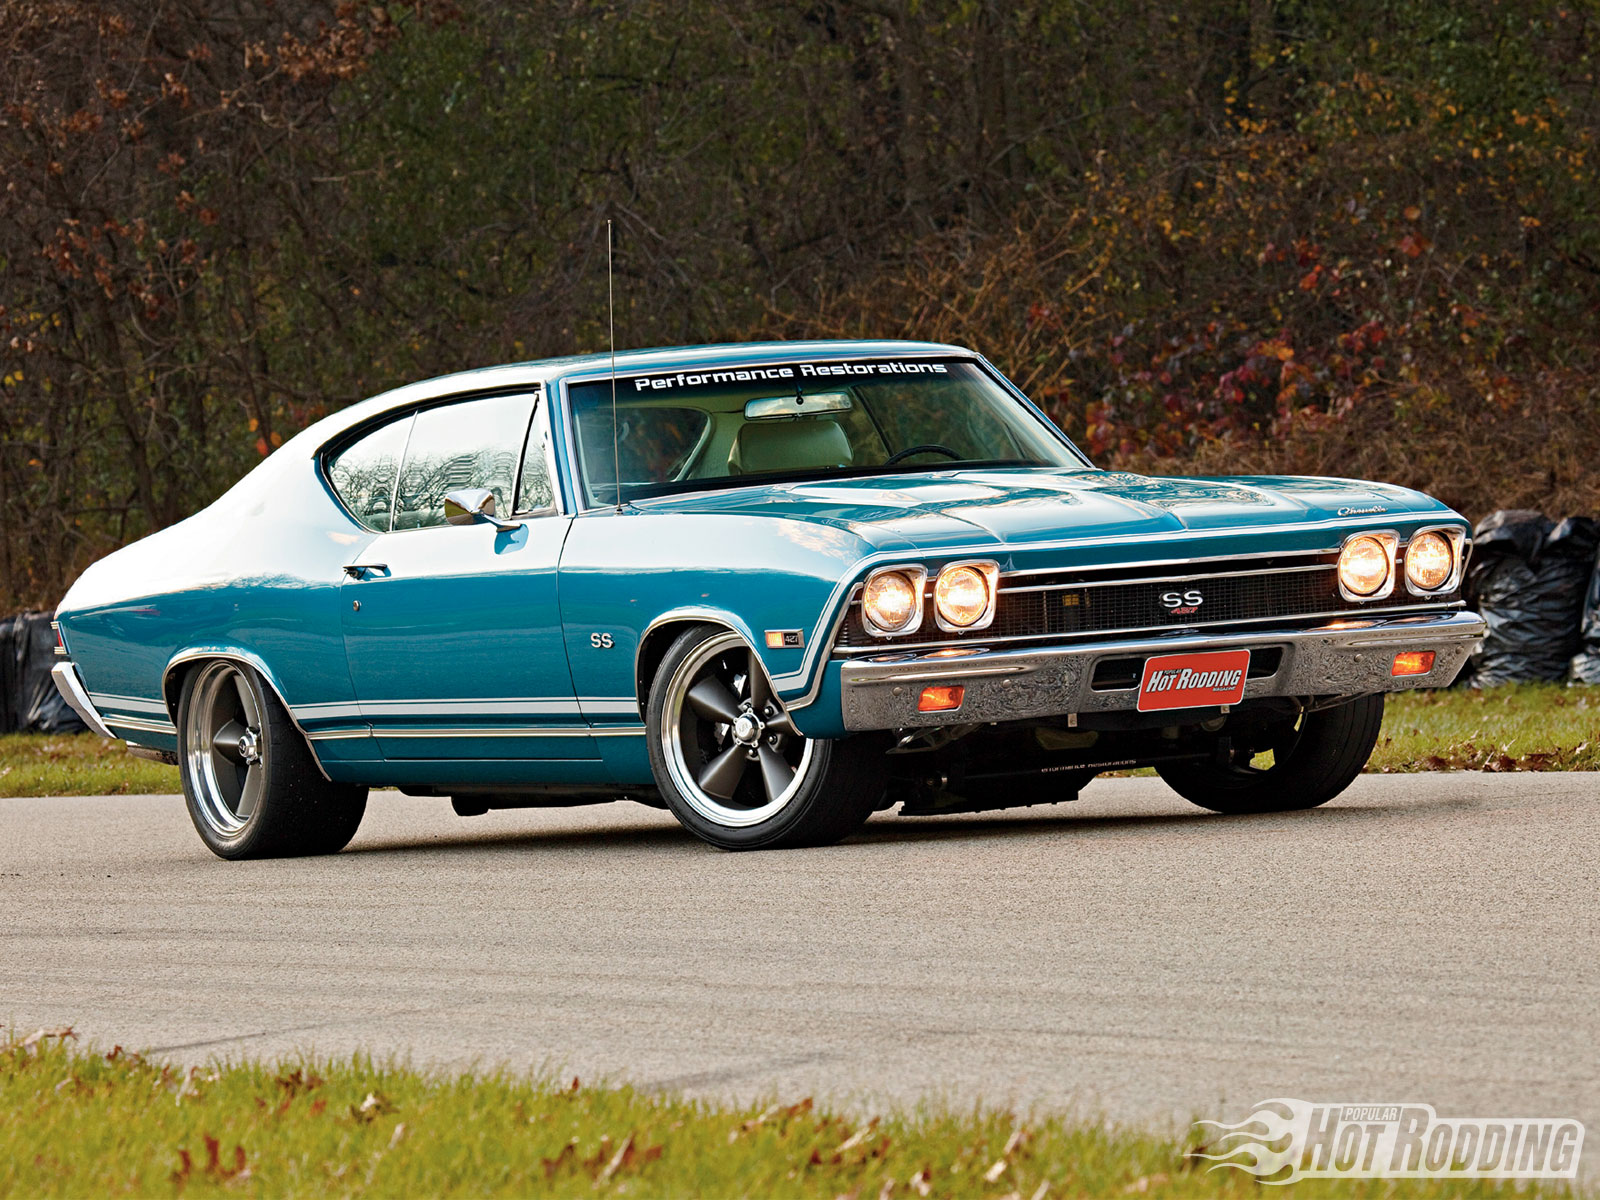  Chevy Chevelle Ss Right Side